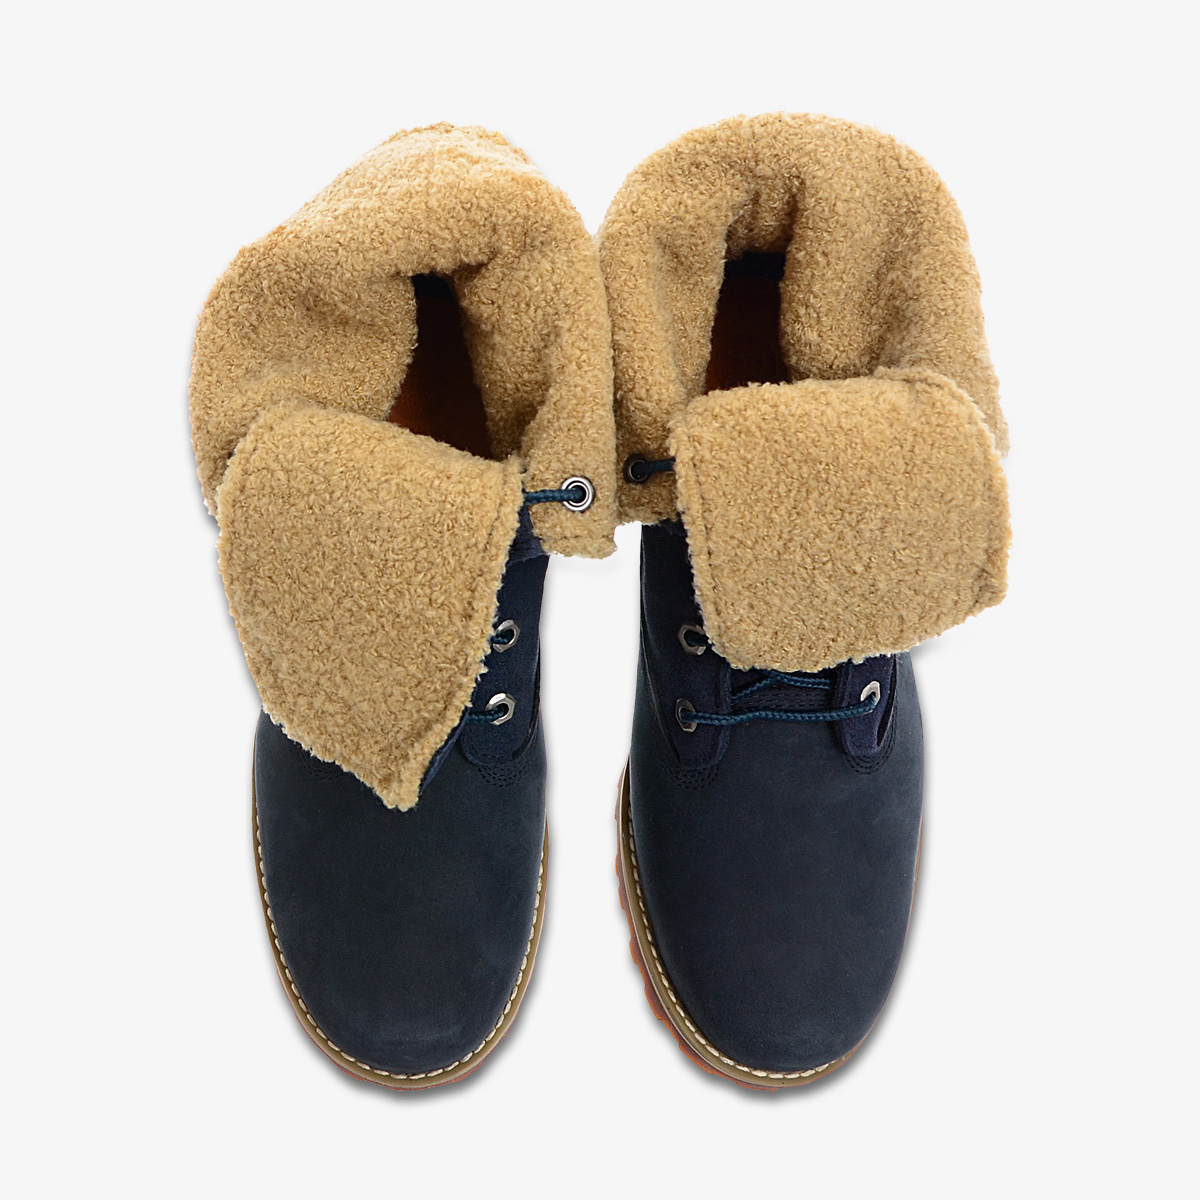 Timberland 6IN WP Shearling 